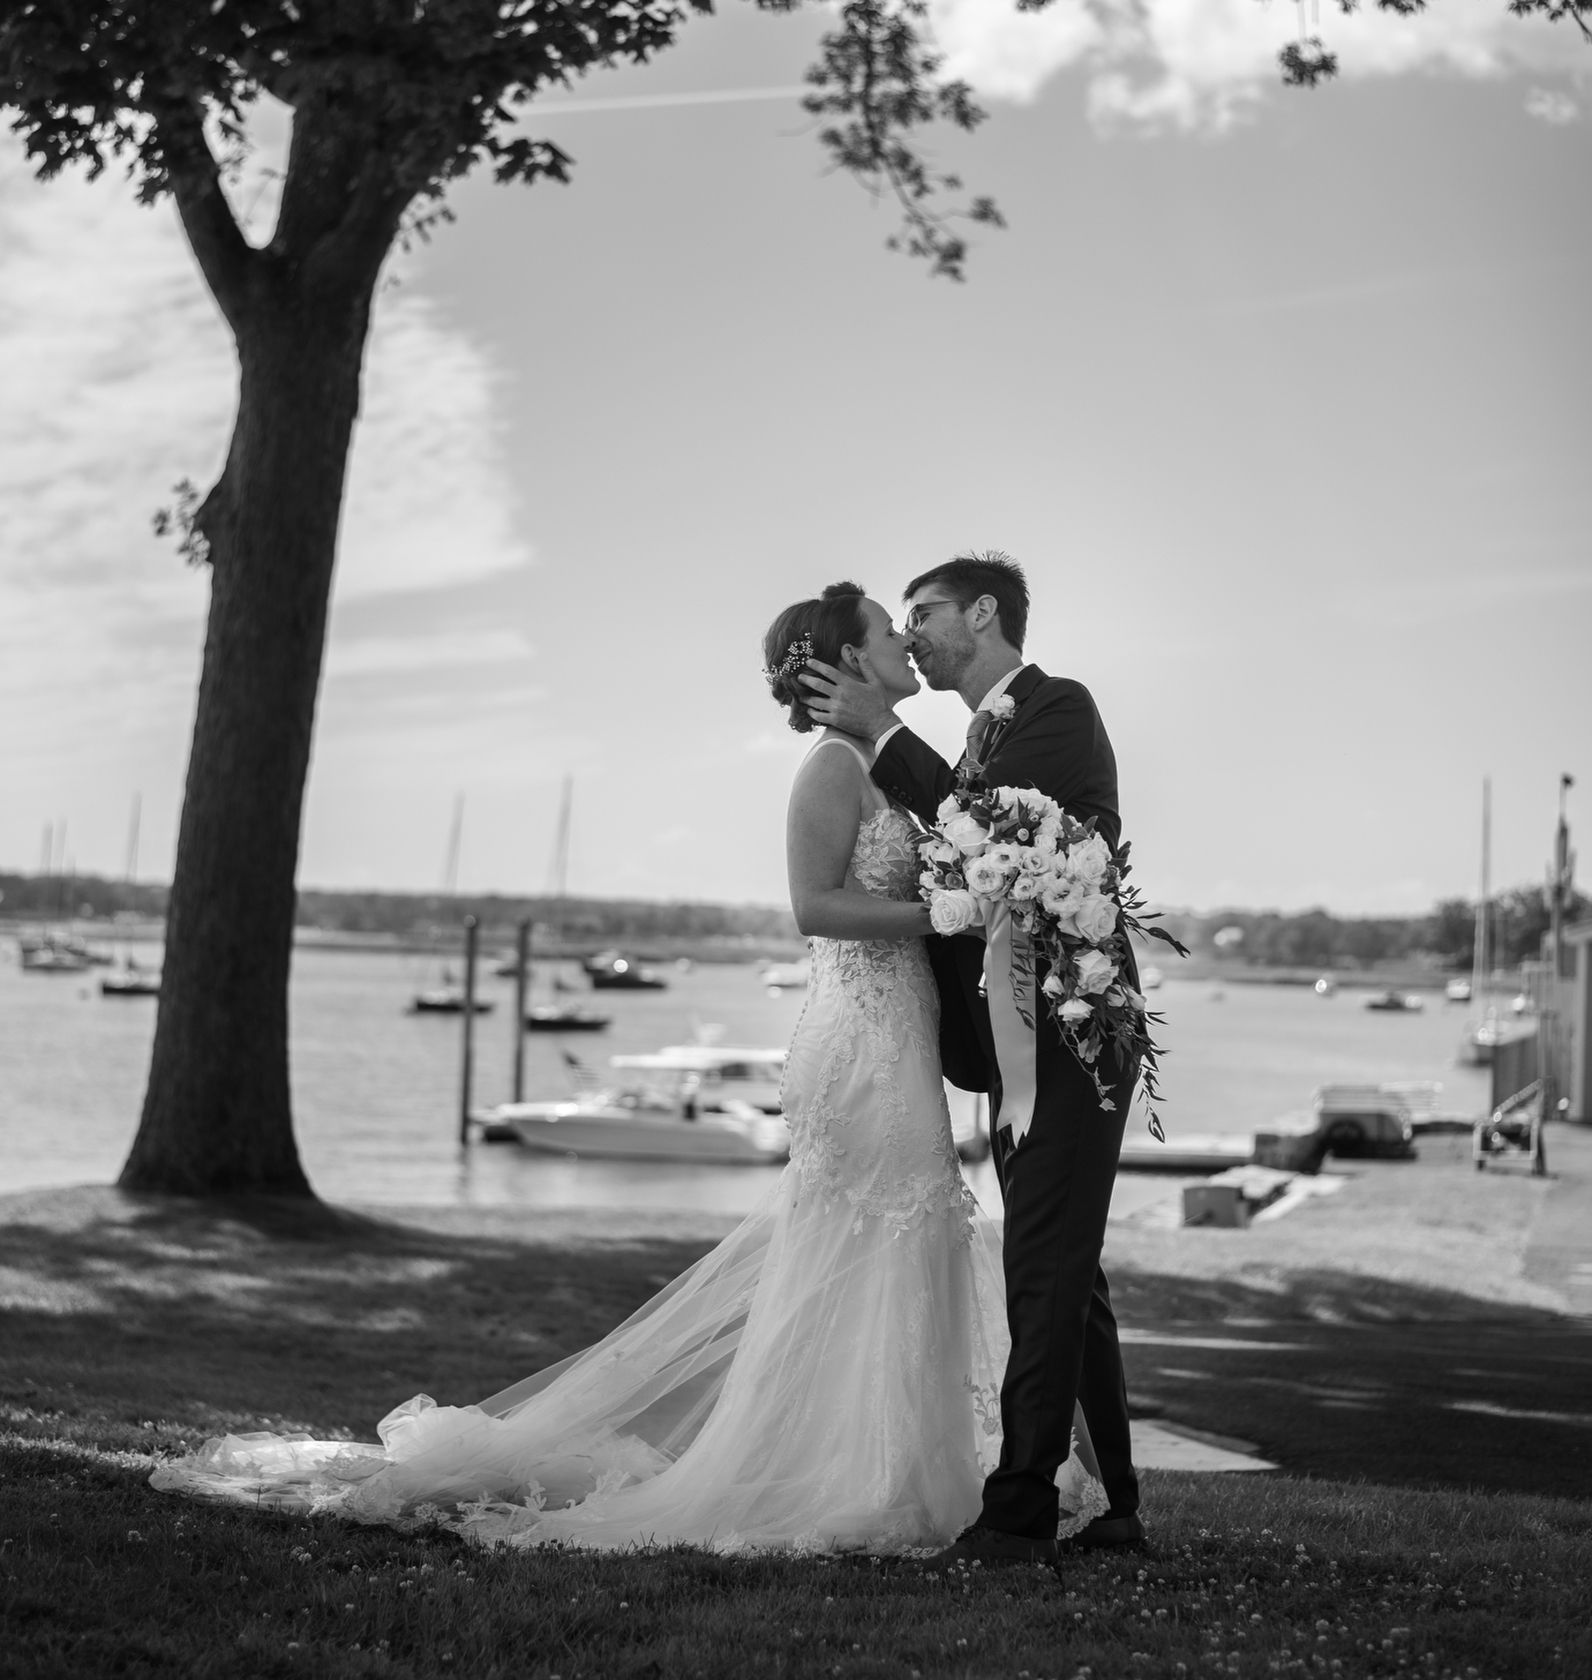 A Yacht Club Wedding Kiss In Black and White